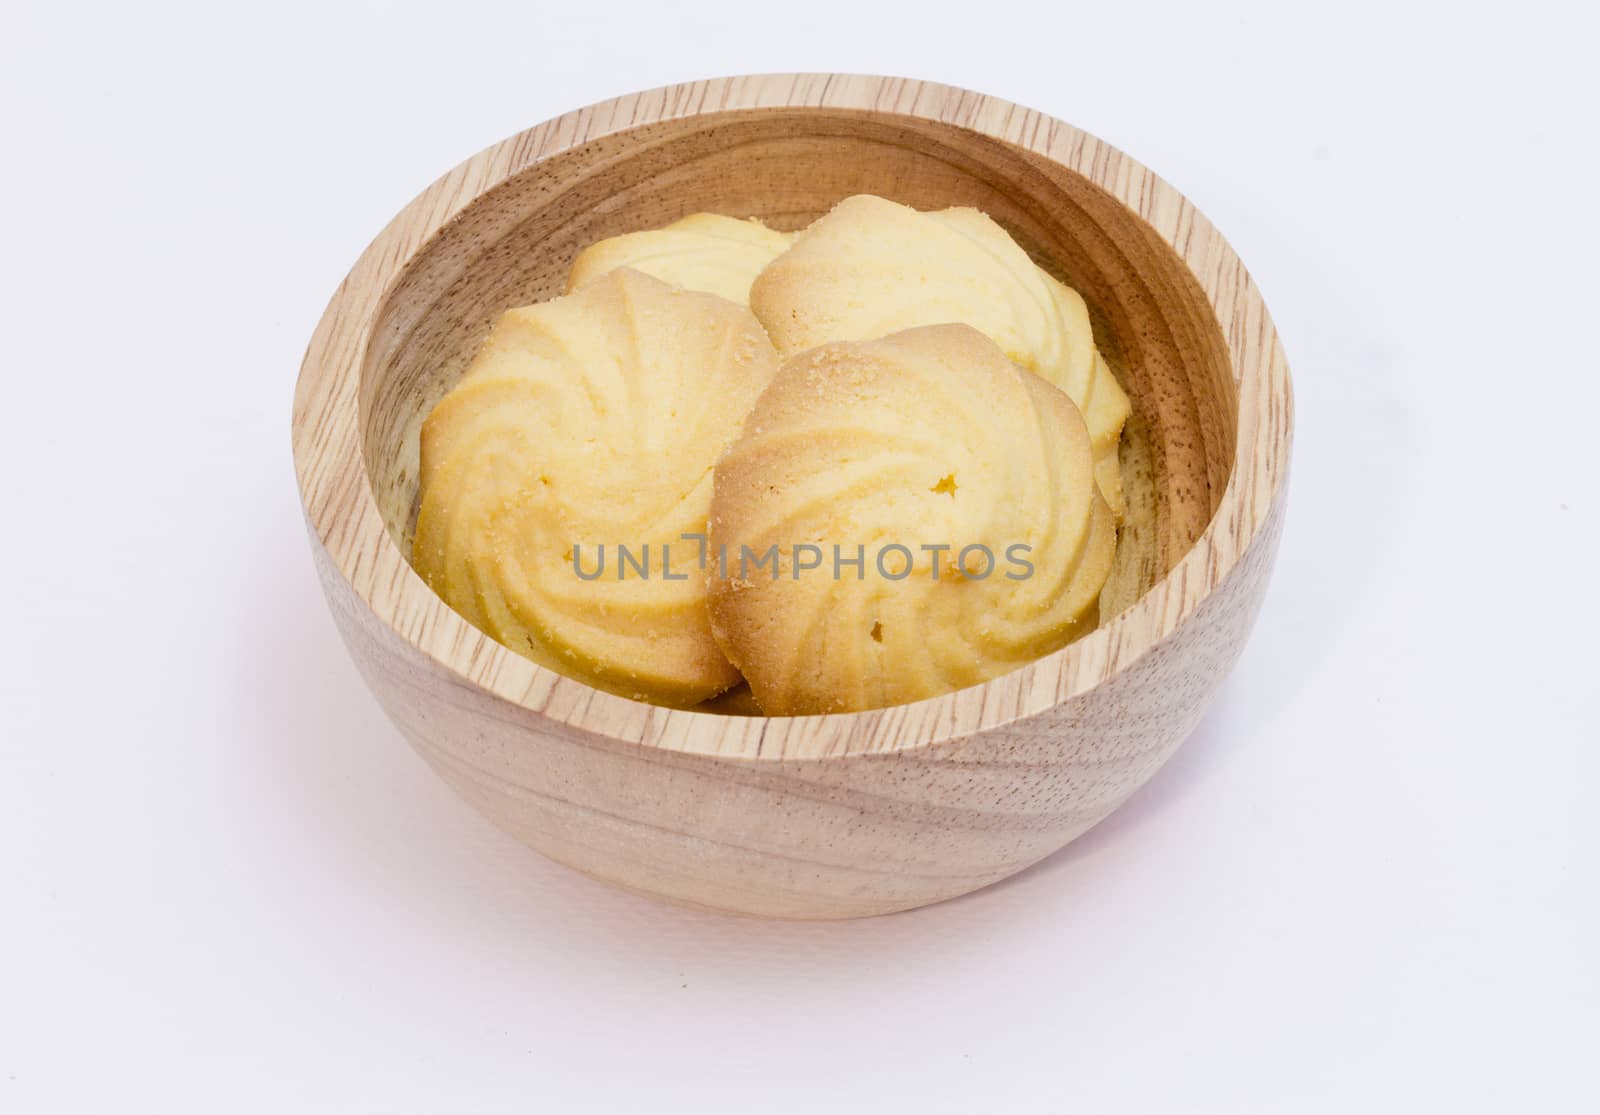 Butter cookies in wooden bowl